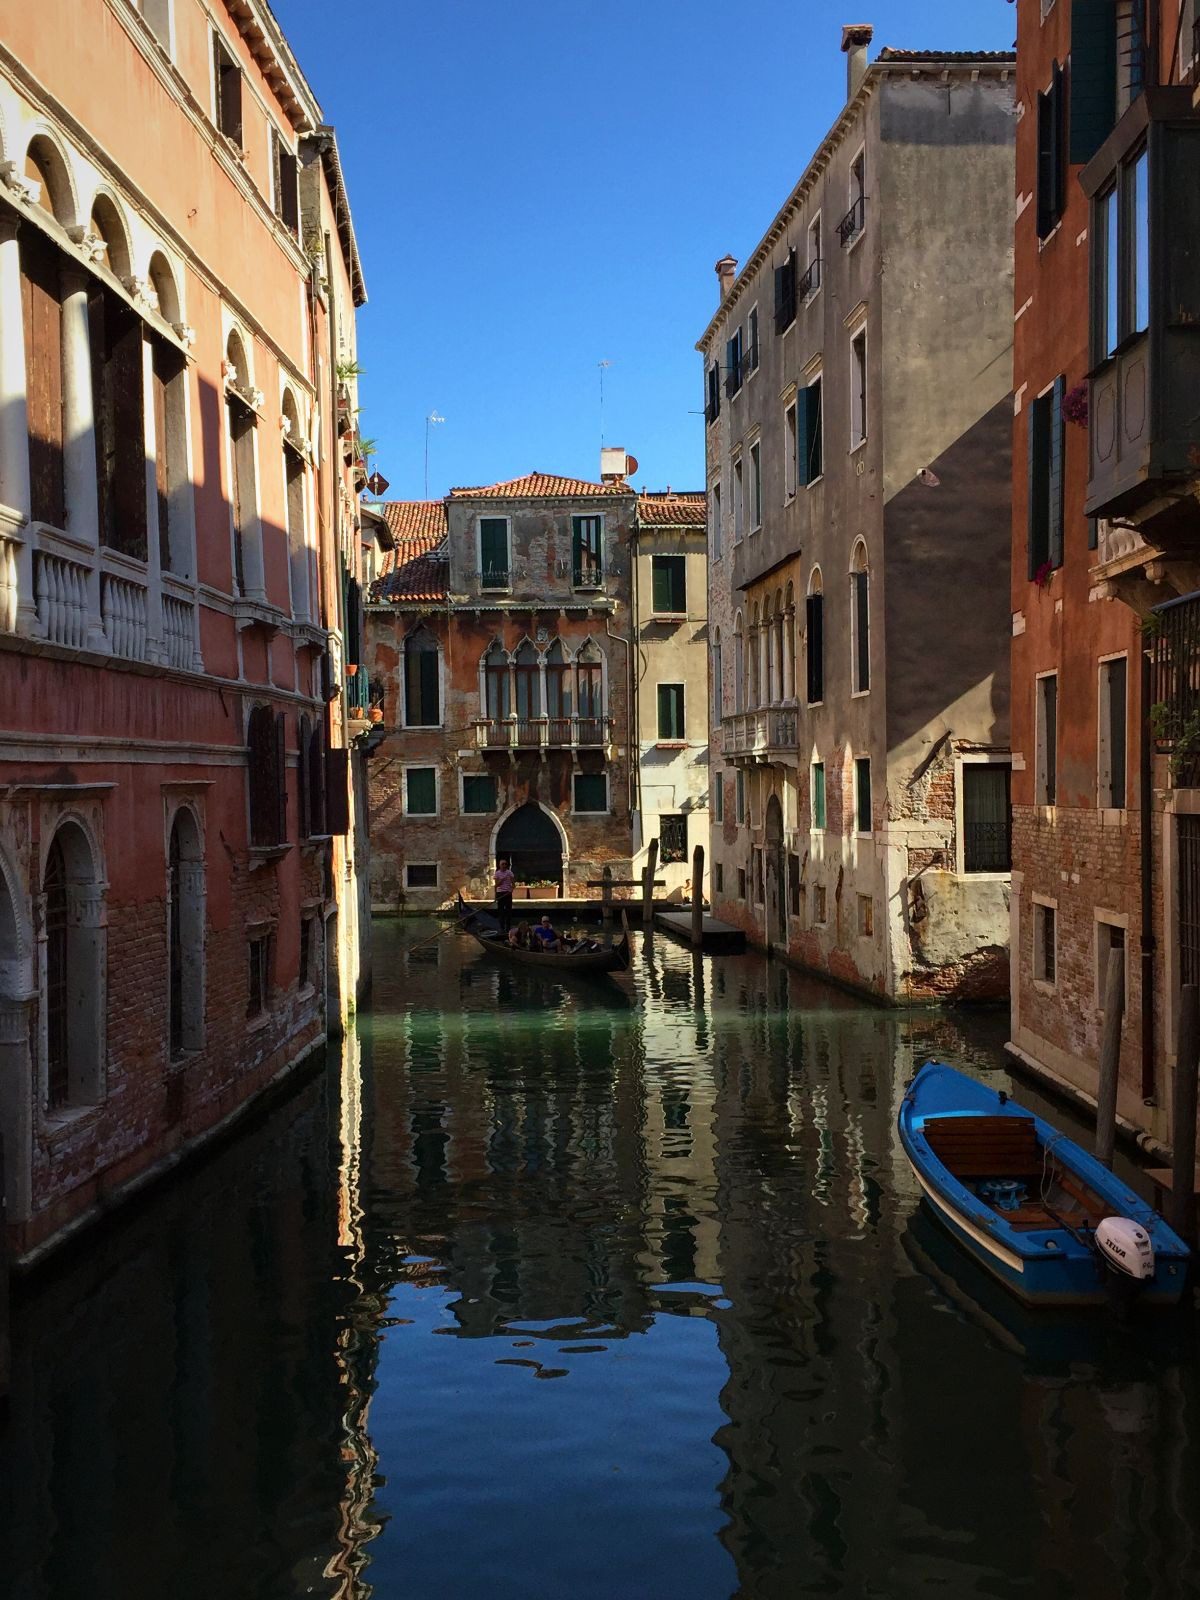 2018 European travel review: Canal in Venice, Italy